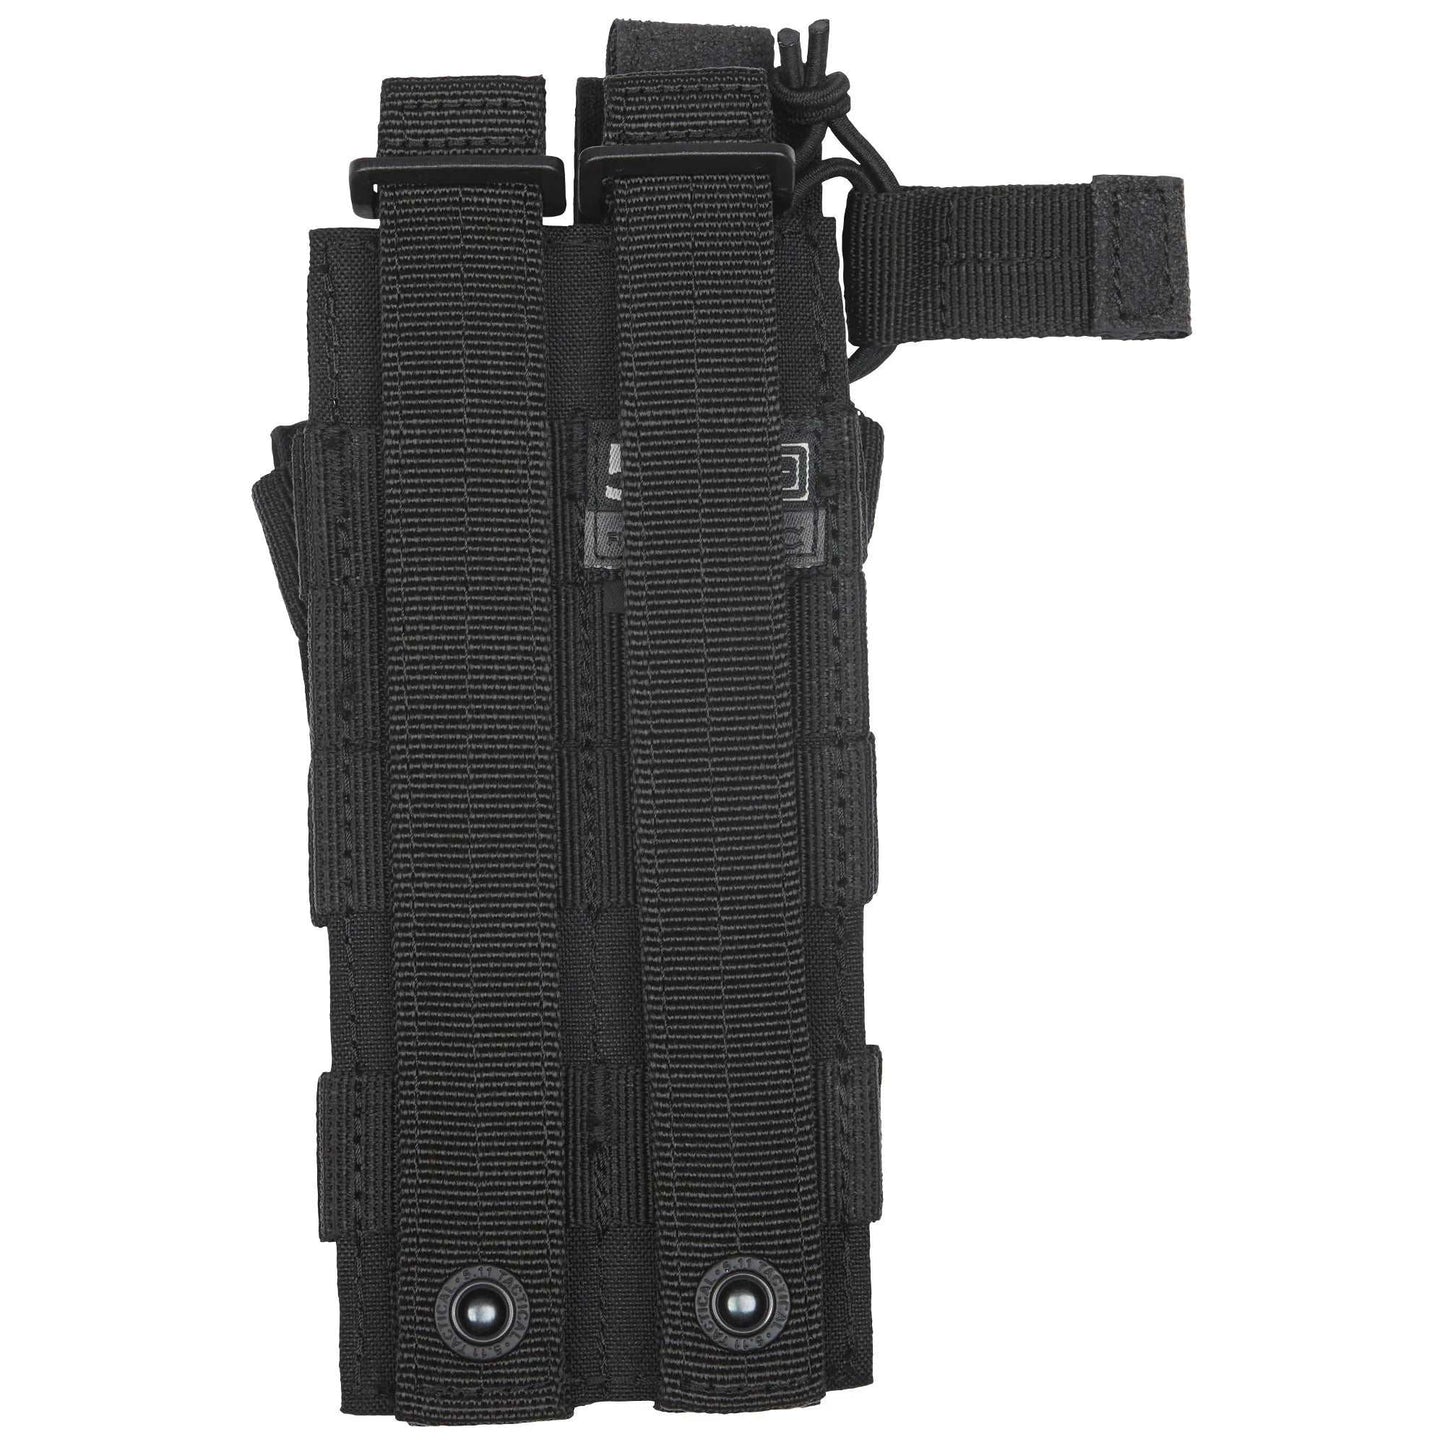 Ammunition Cases & Holders - 5.11 Tactical Double Mp5 Bungee/Cover Pouch